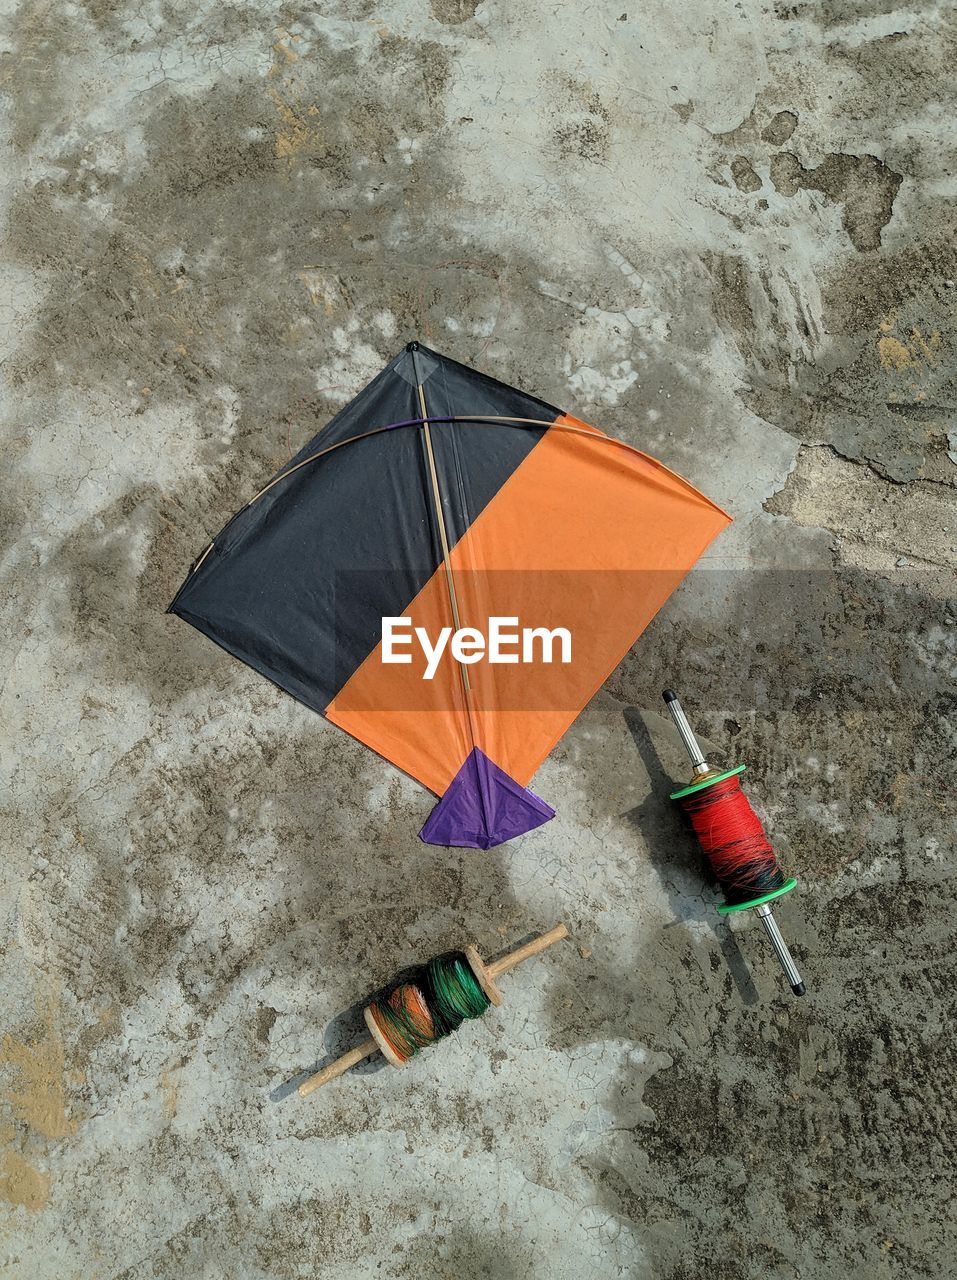 HIGH ANGLE VIEW OF MULTI COLORED UMBRELLA ON WATER